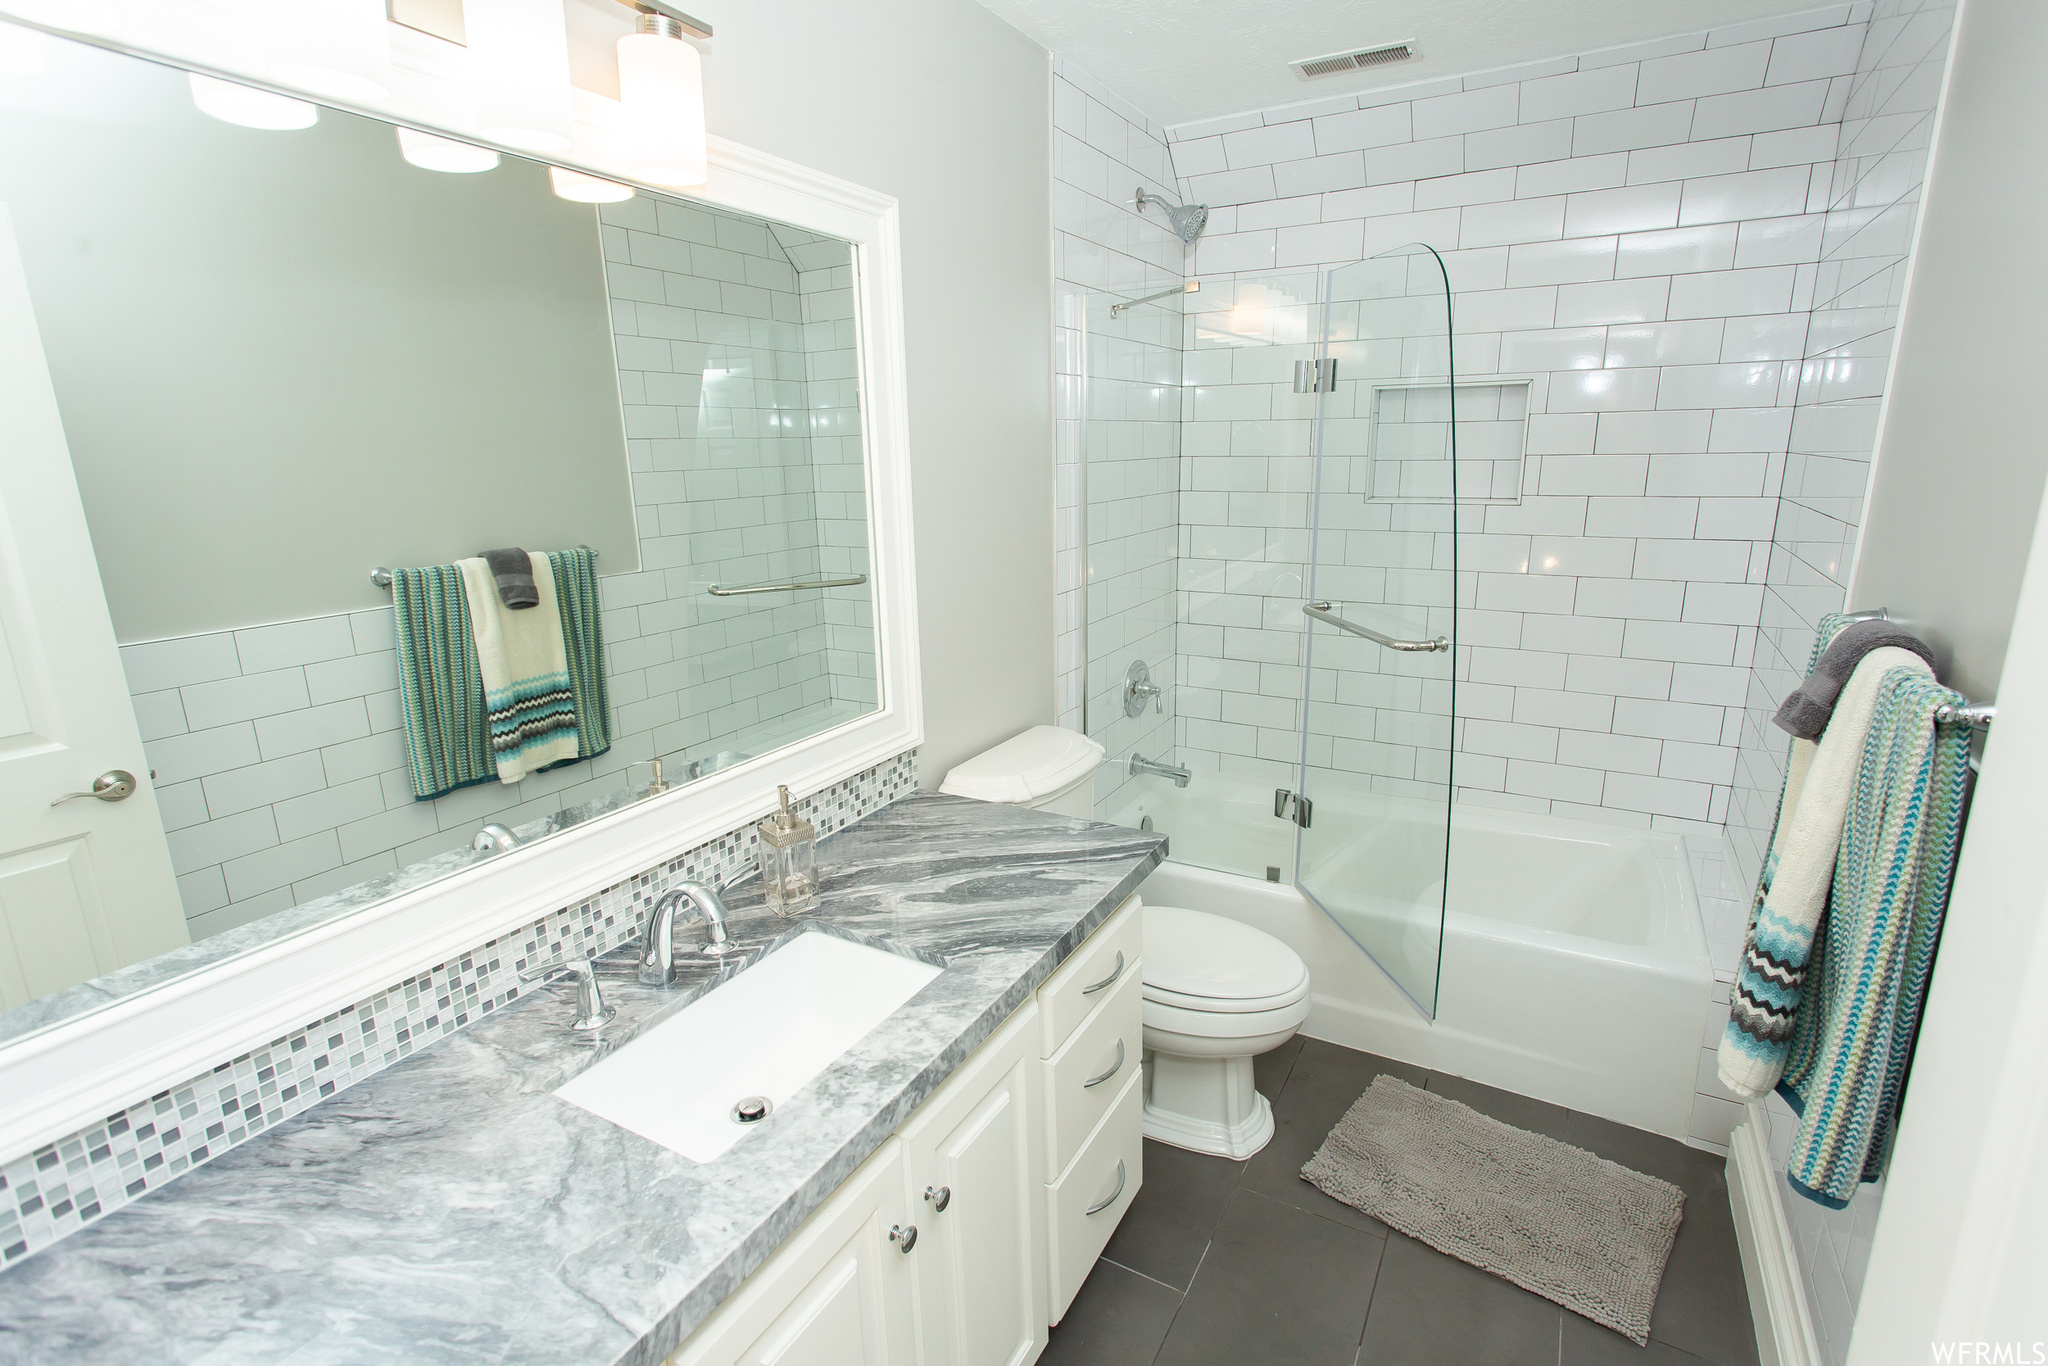 Full bathroom with light tile flooring, shower / bath combination with glass door, mirror, and vanity with extensive cabinet space.